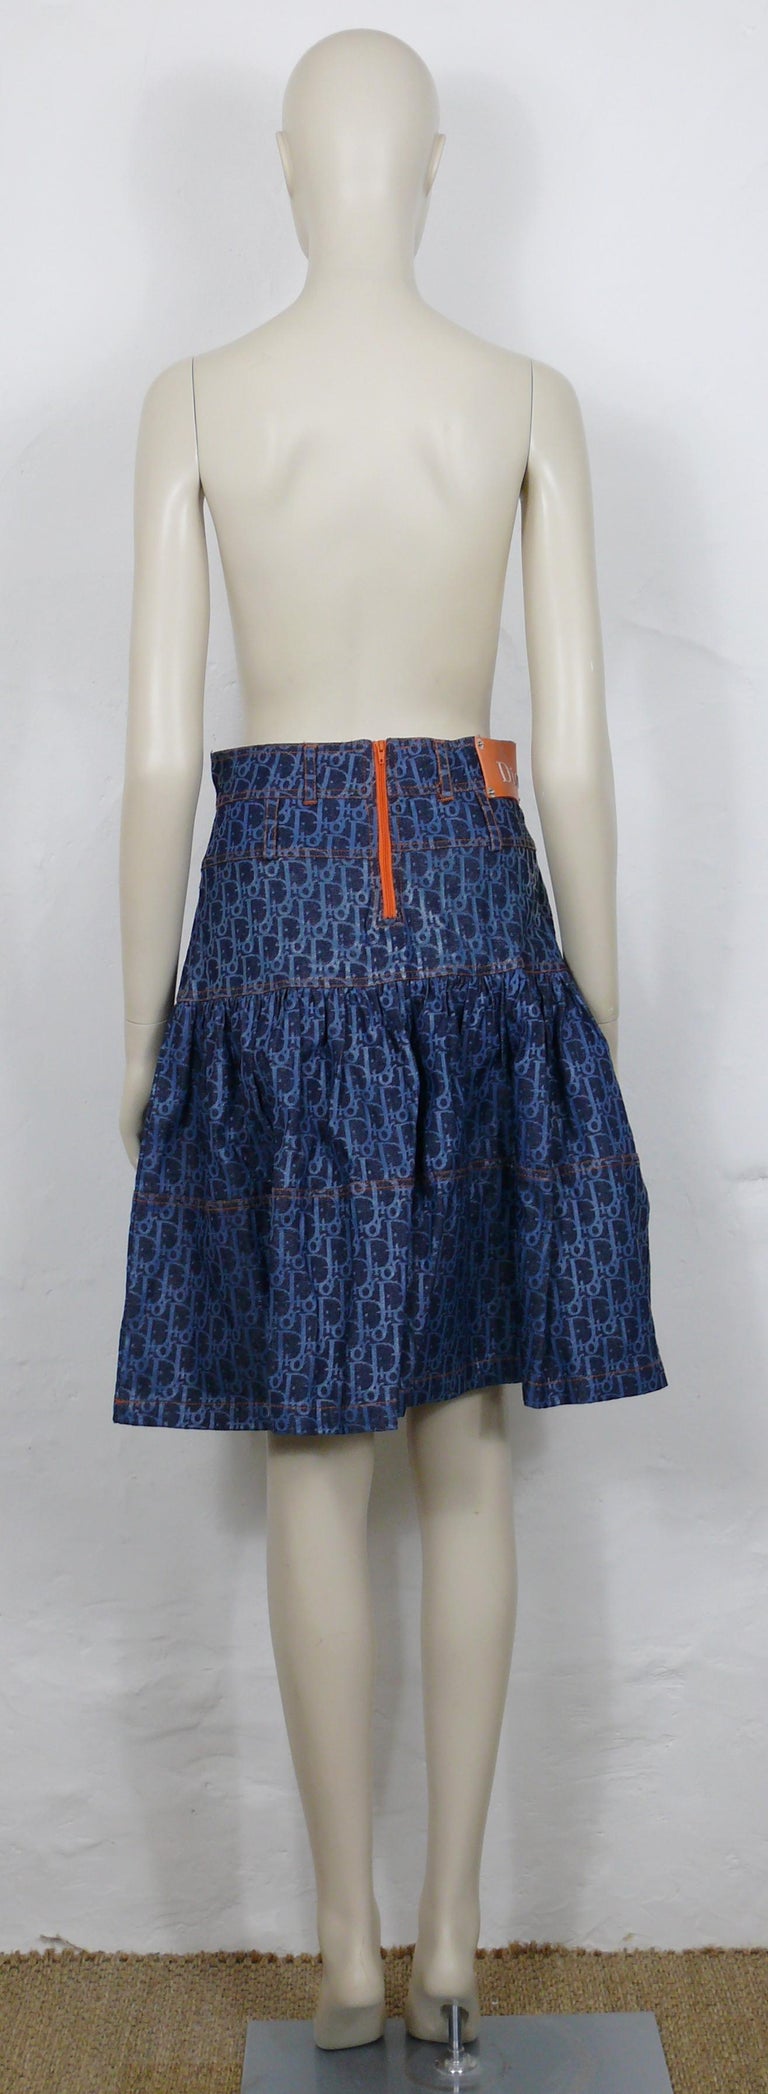 Christian Dior Boutique by John Galliano Vintage Trotter Denim Skirt US Size 6 For Sale 2